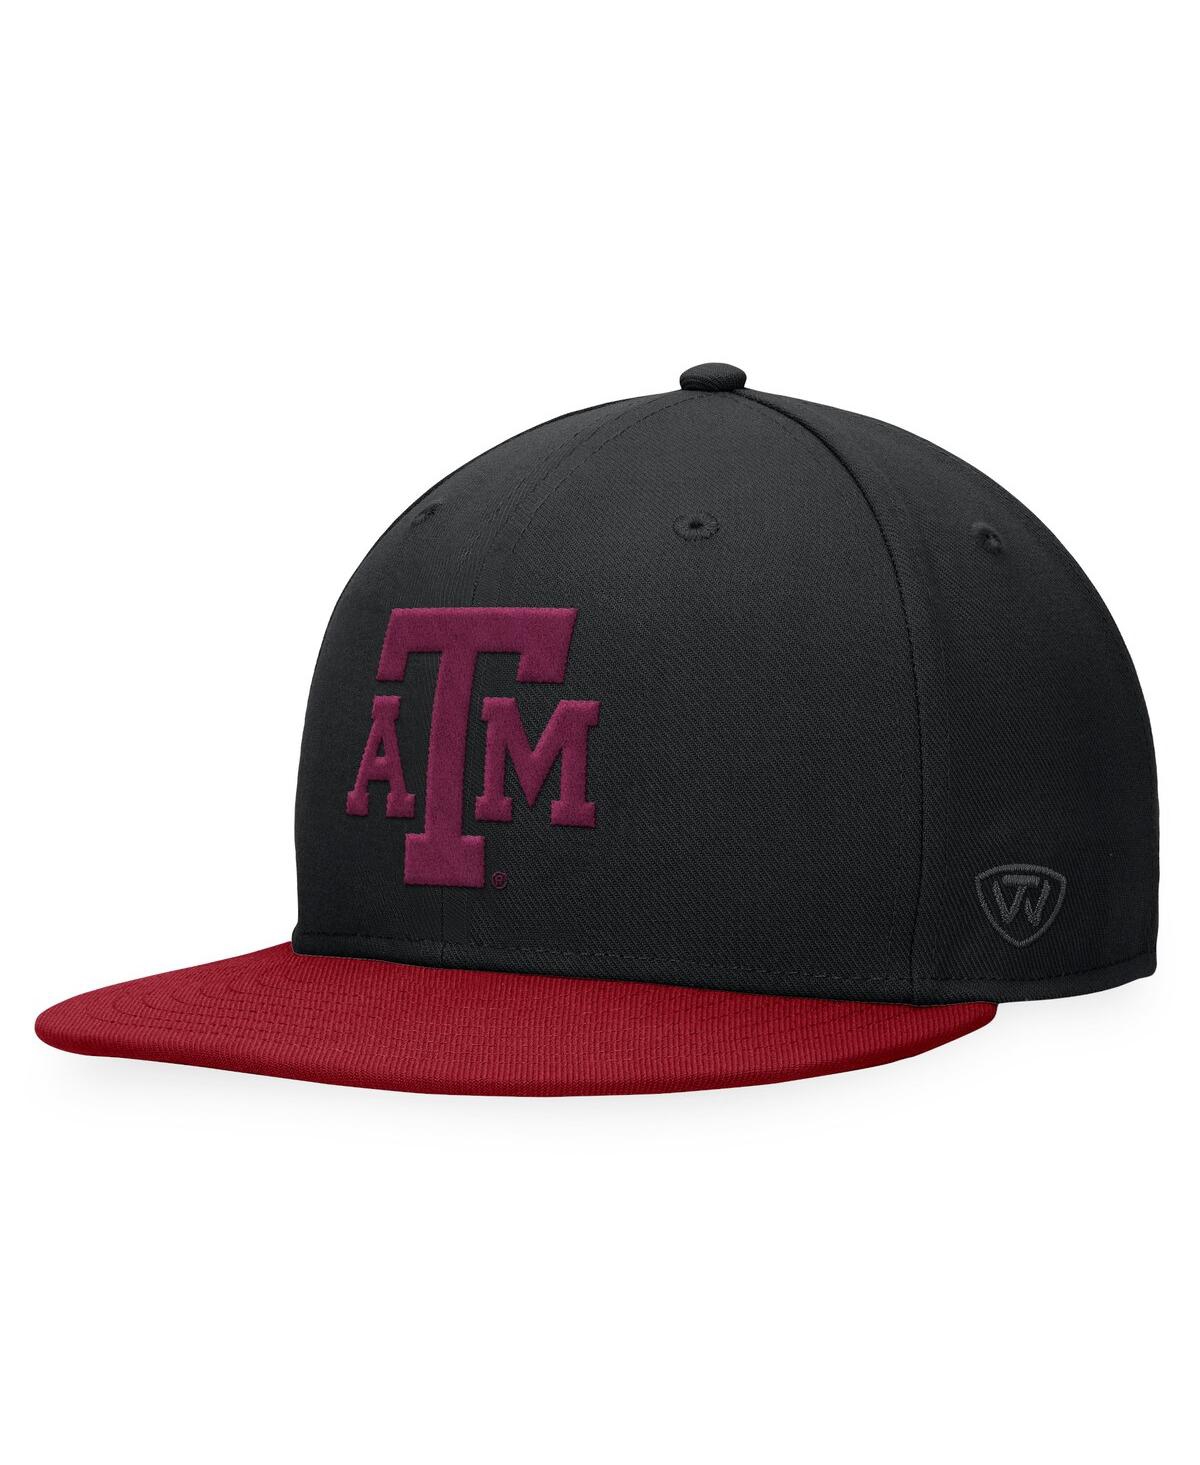 Men's Black Texas A&M Aggies Fitted Hat - Black